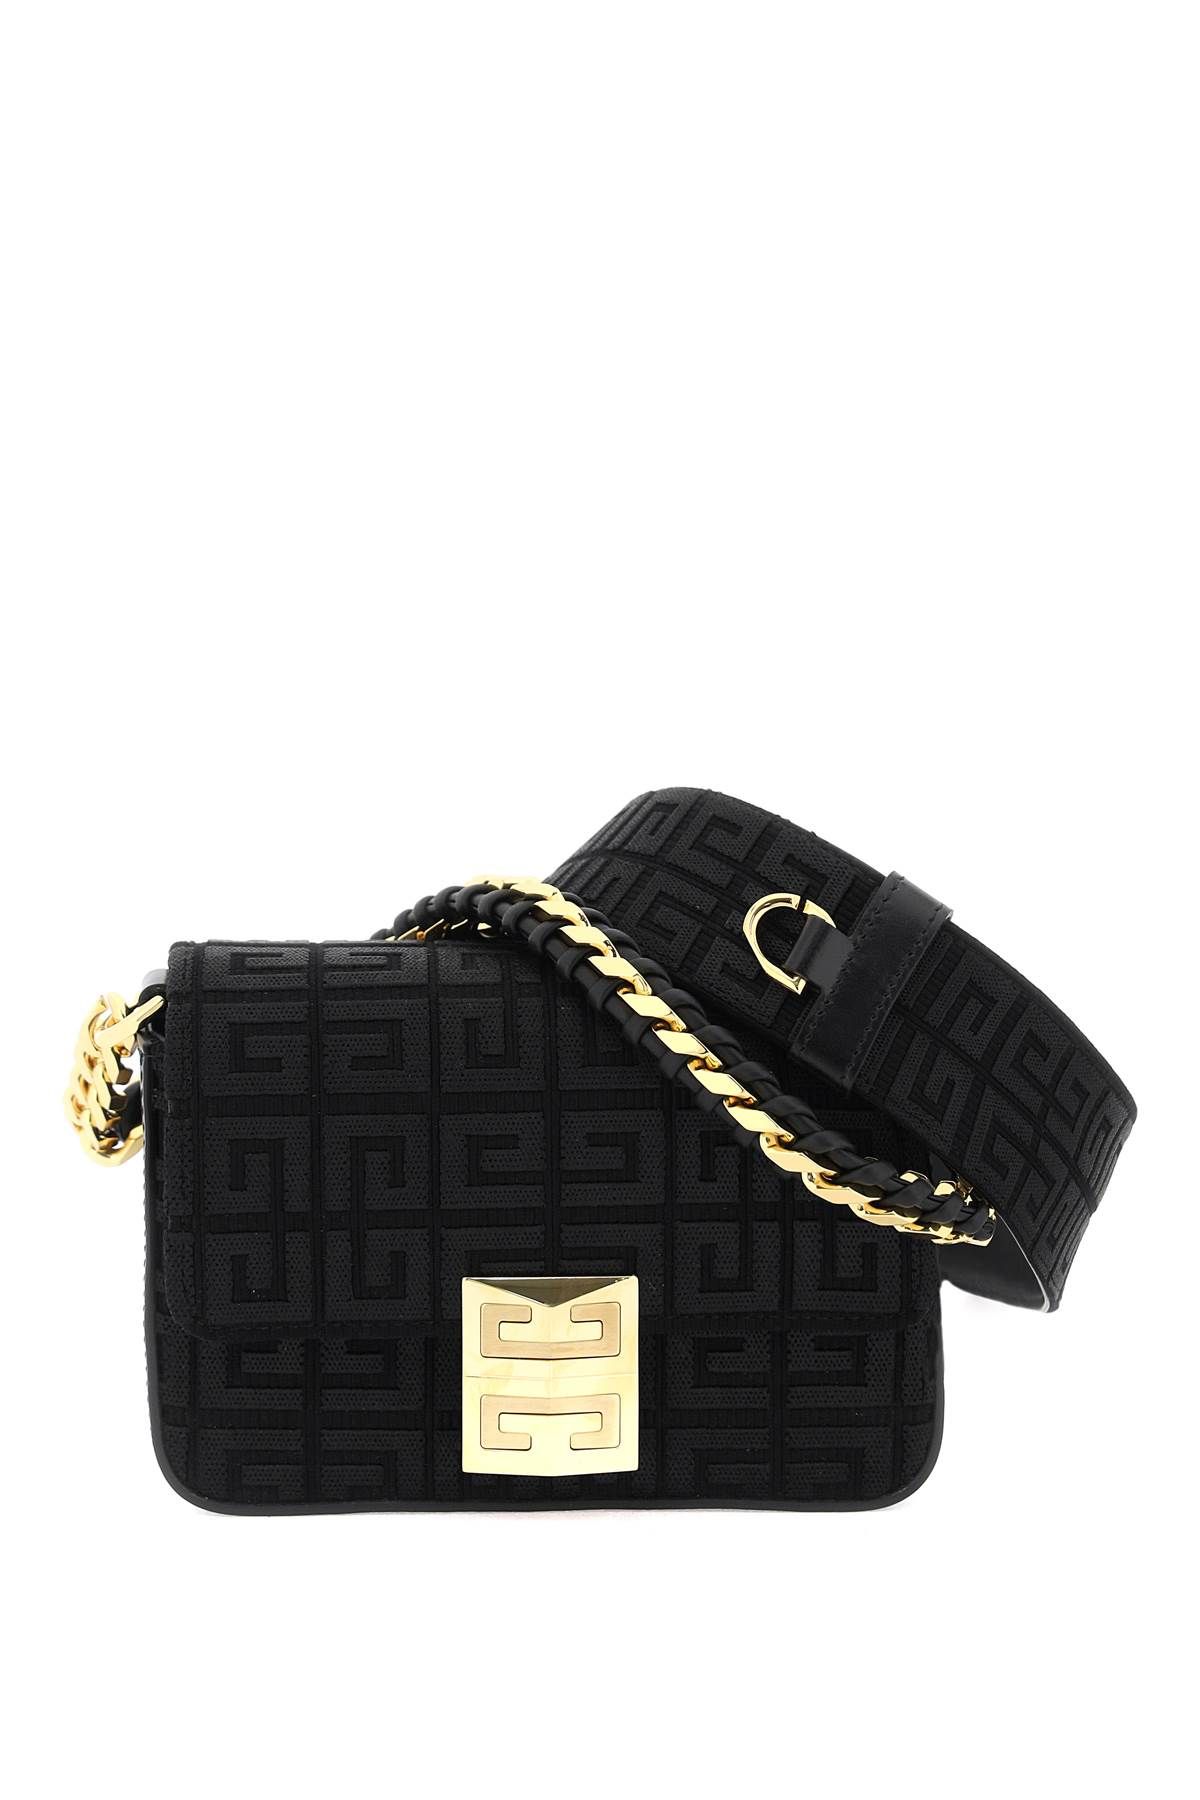 Givenchy Mini Bag With Embroidered 4g In Black